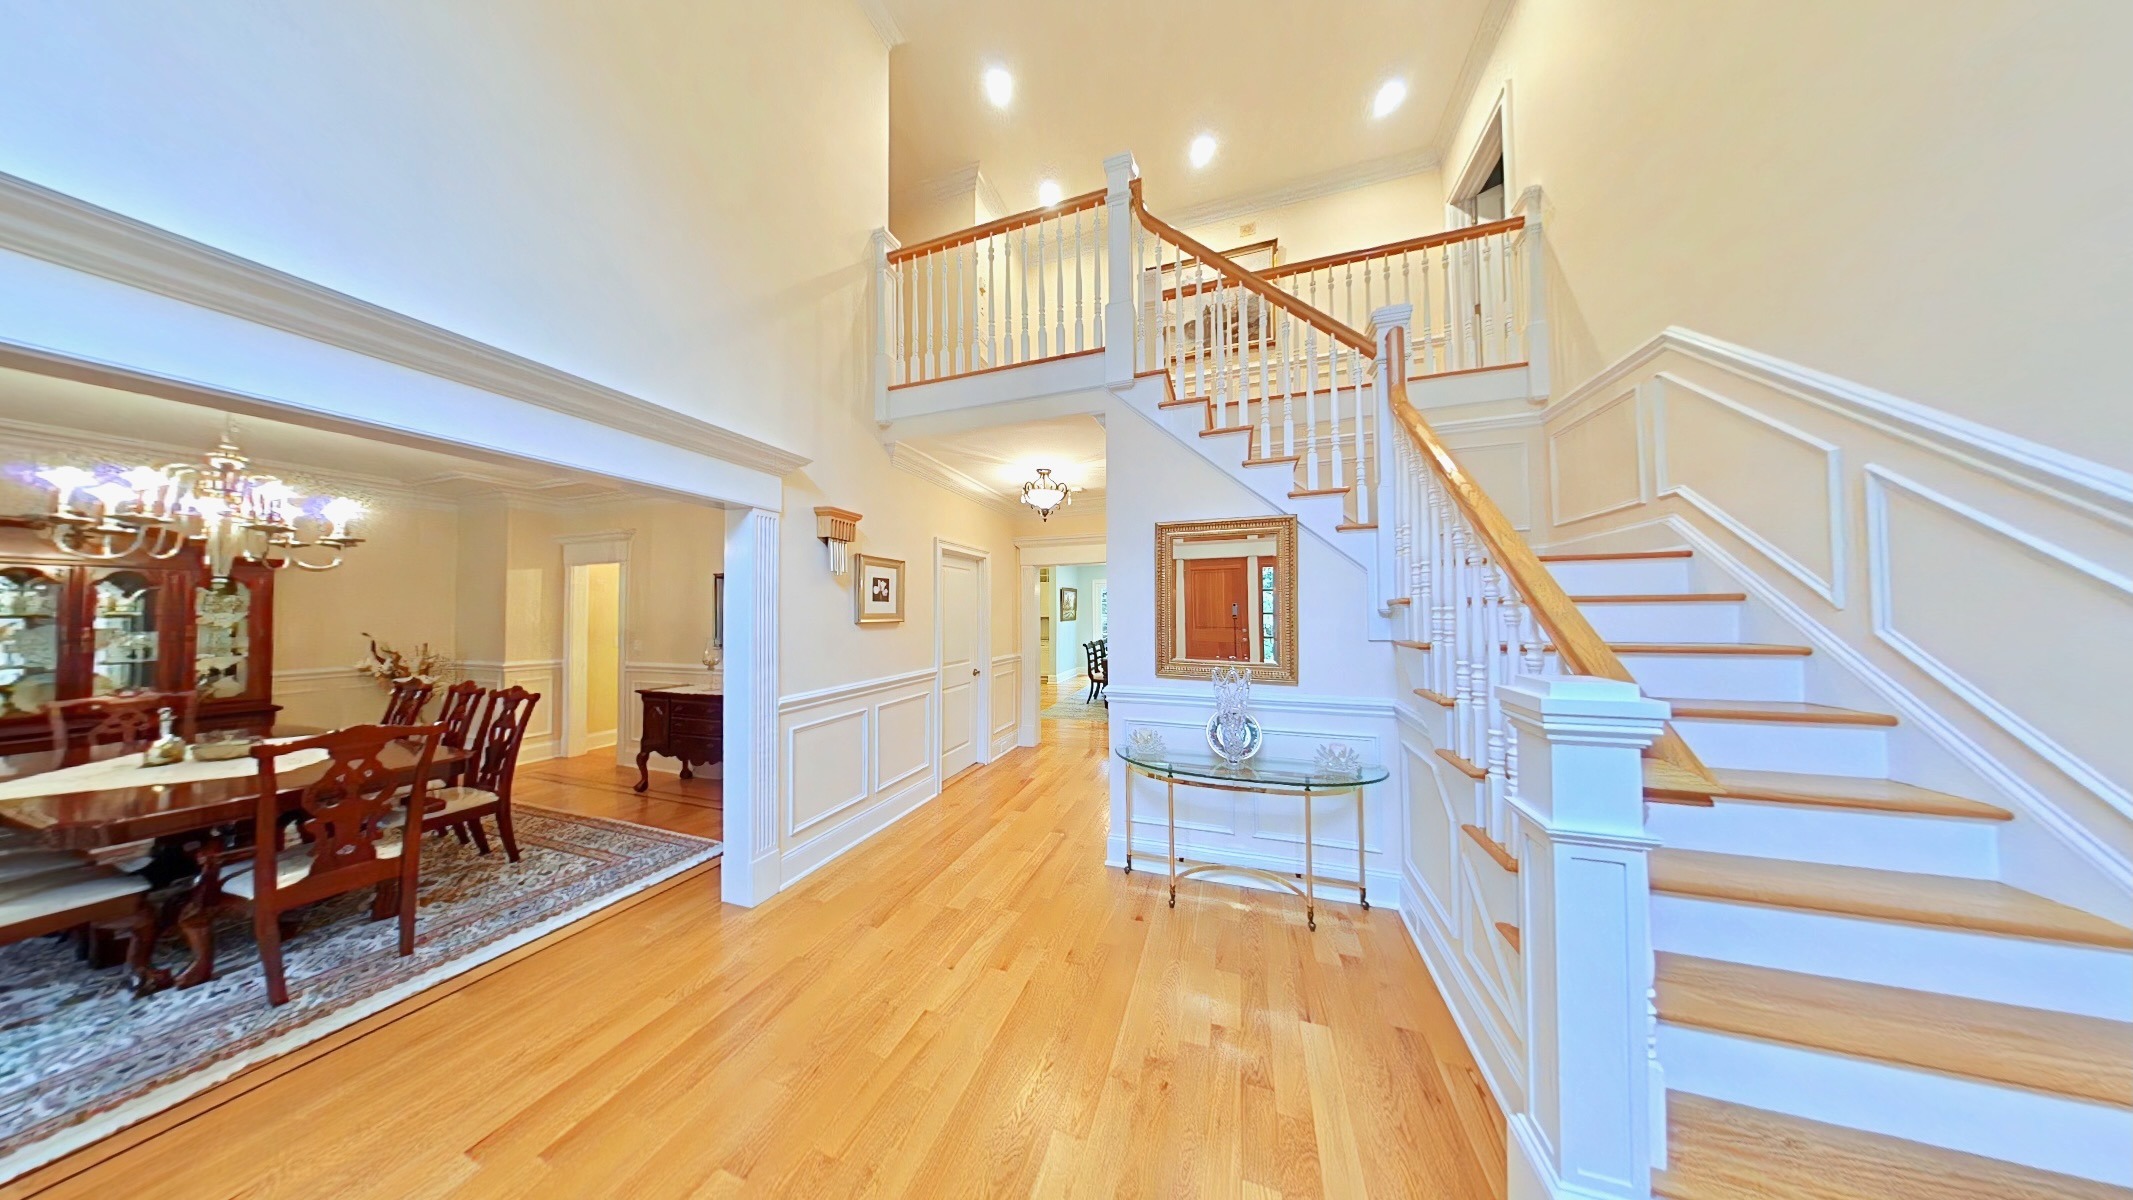 Grand Entrance Foyer. Elegant entry hall with 20’ ceiling.